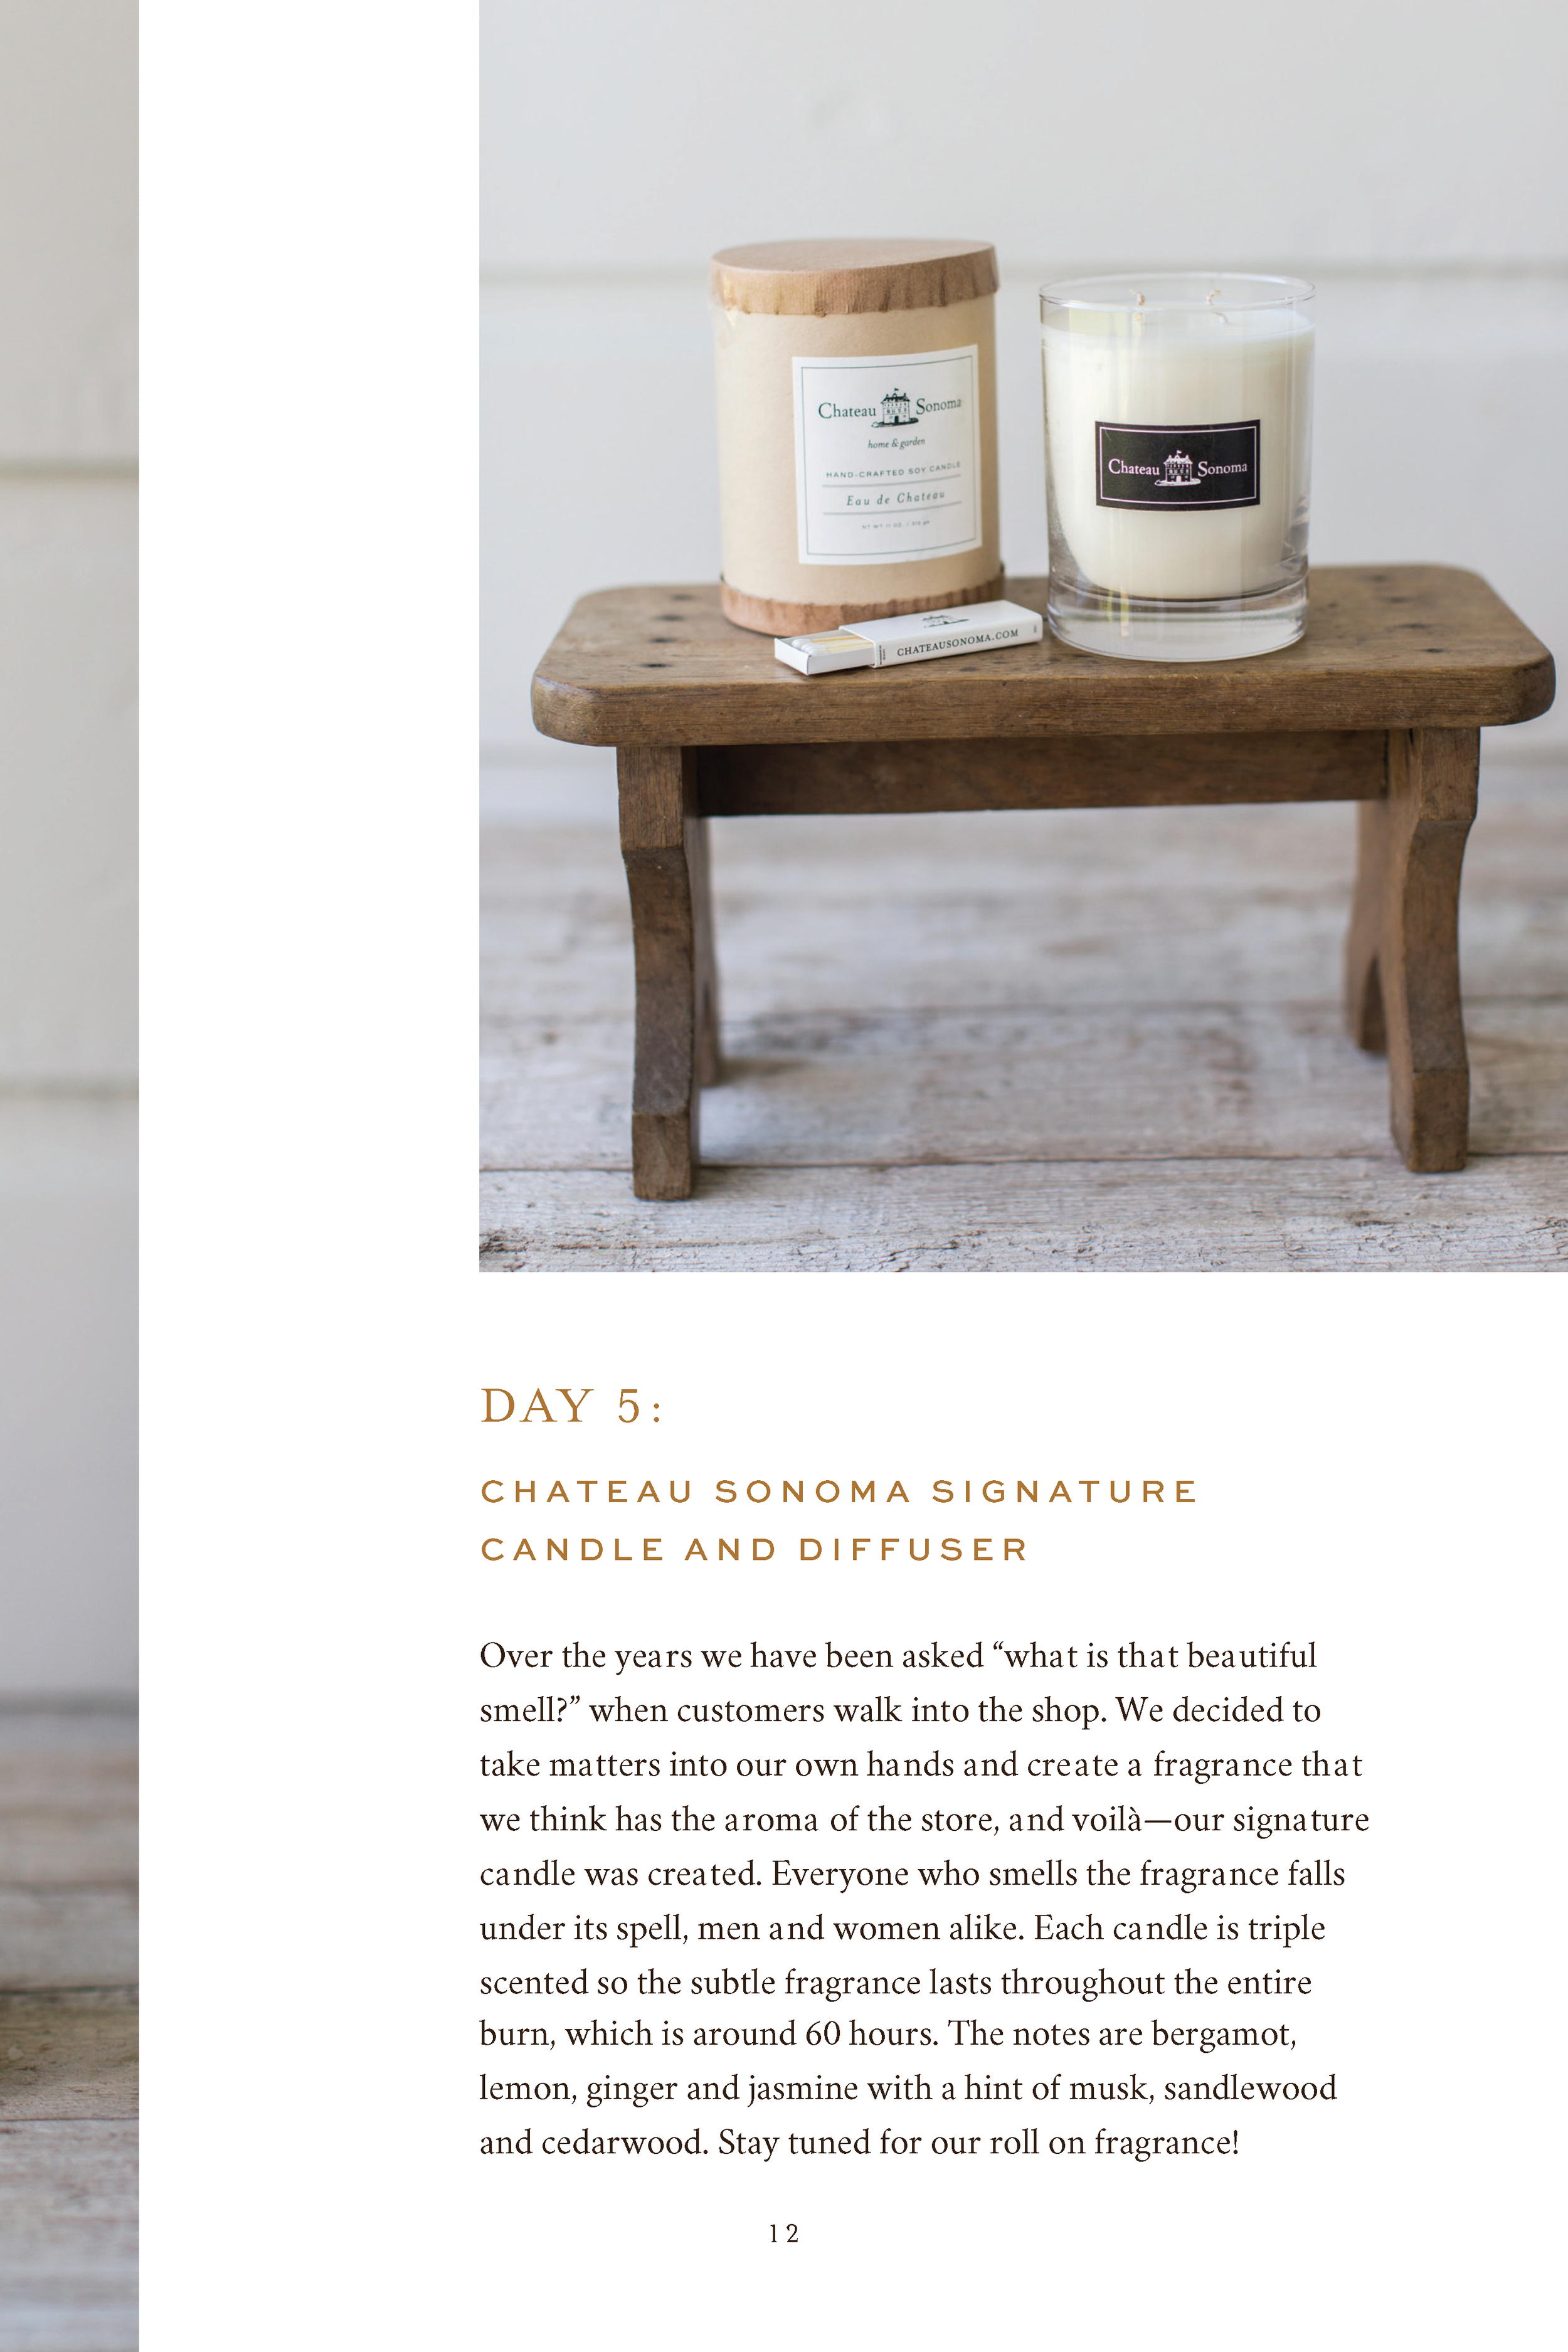 ChateauSonoma_HolidayLookbook_19_pages (1)_Page_13.png